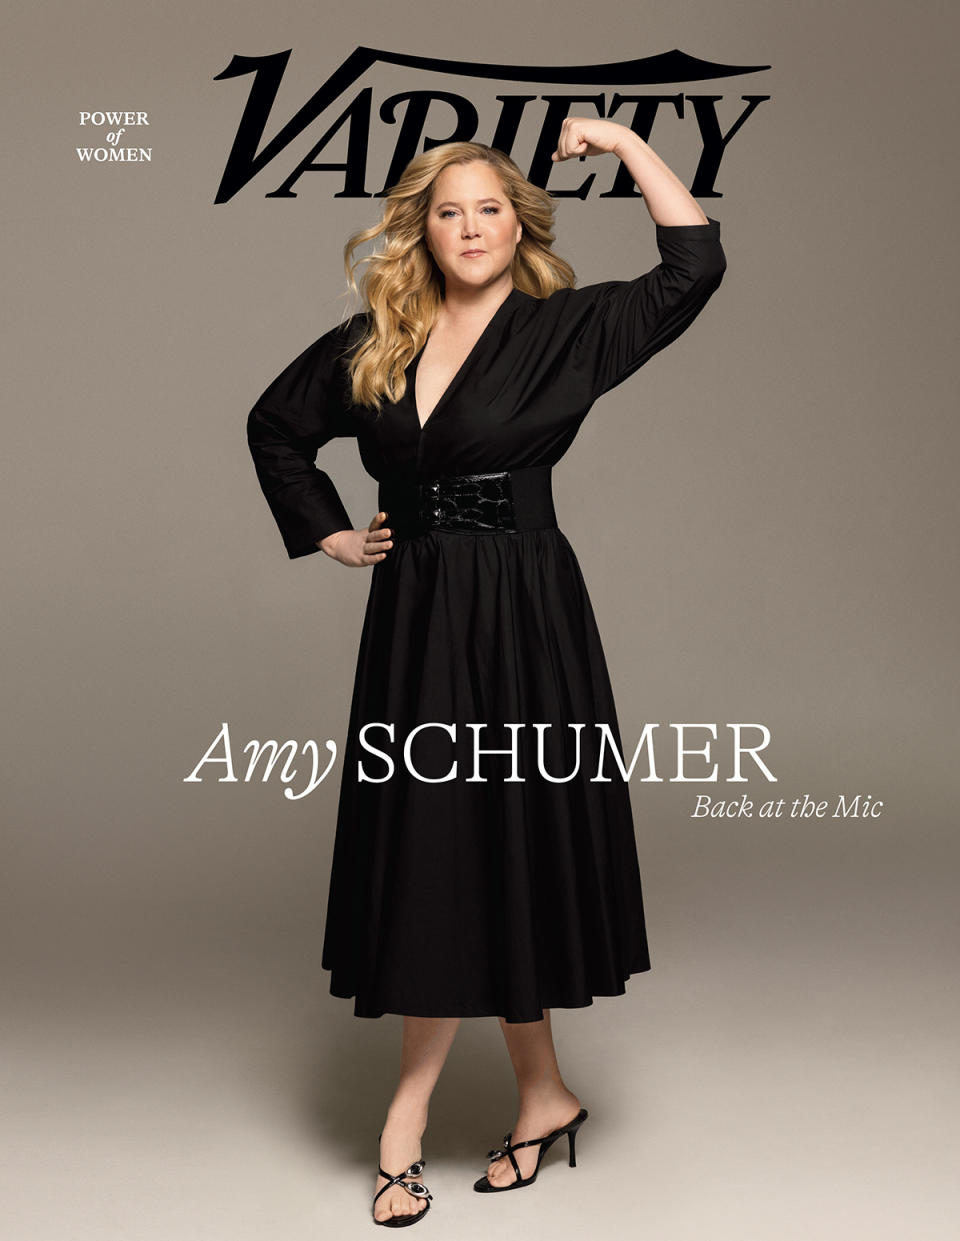 Amy Schumer Variety Power of Women Cover